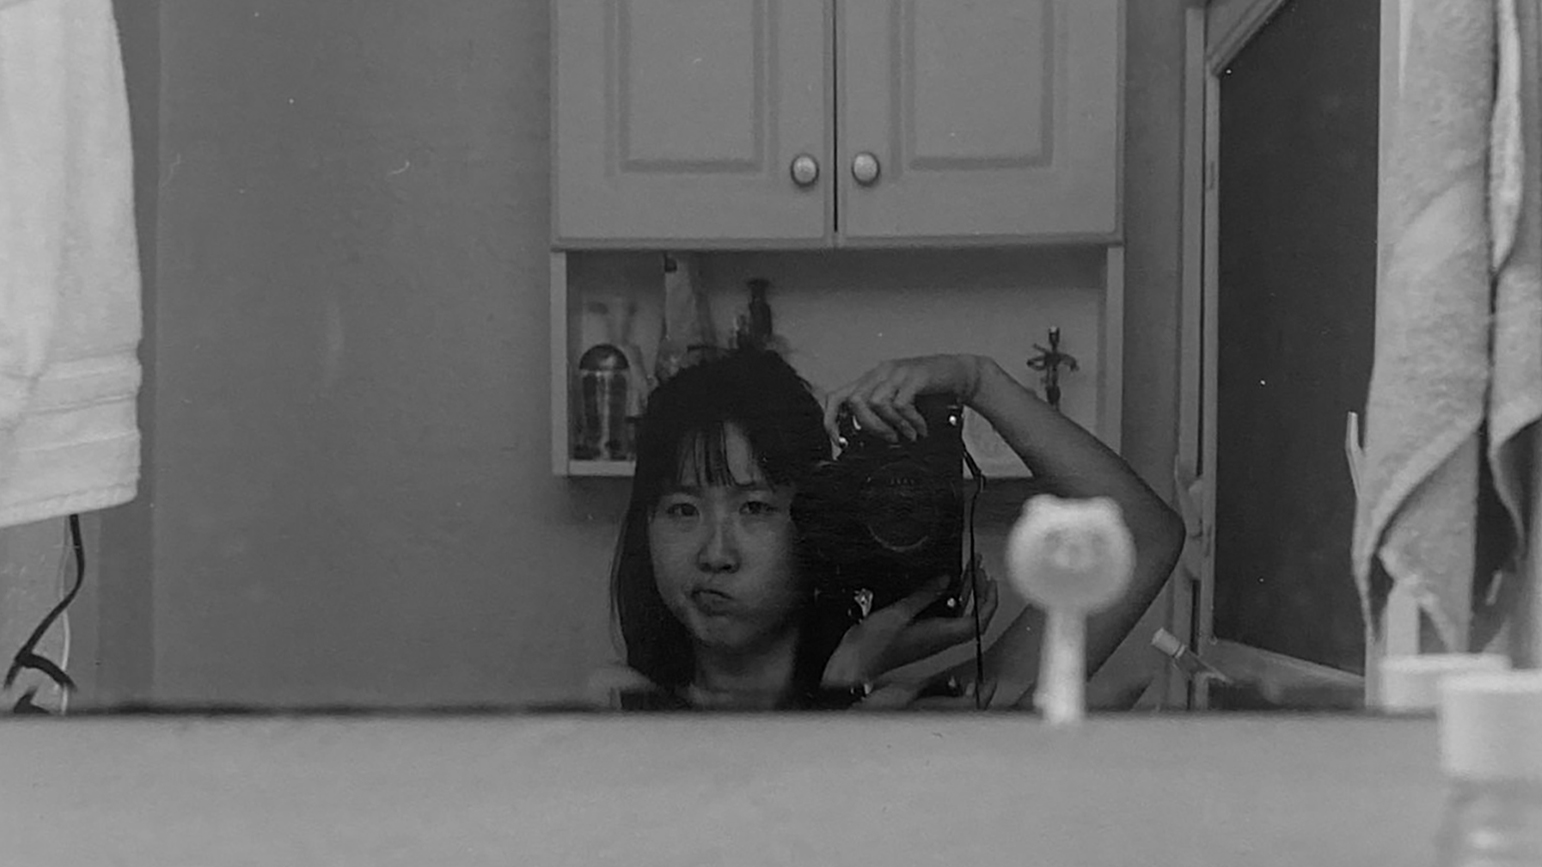 Black and white photograph of Diane Lee taken in a bathroom mirror